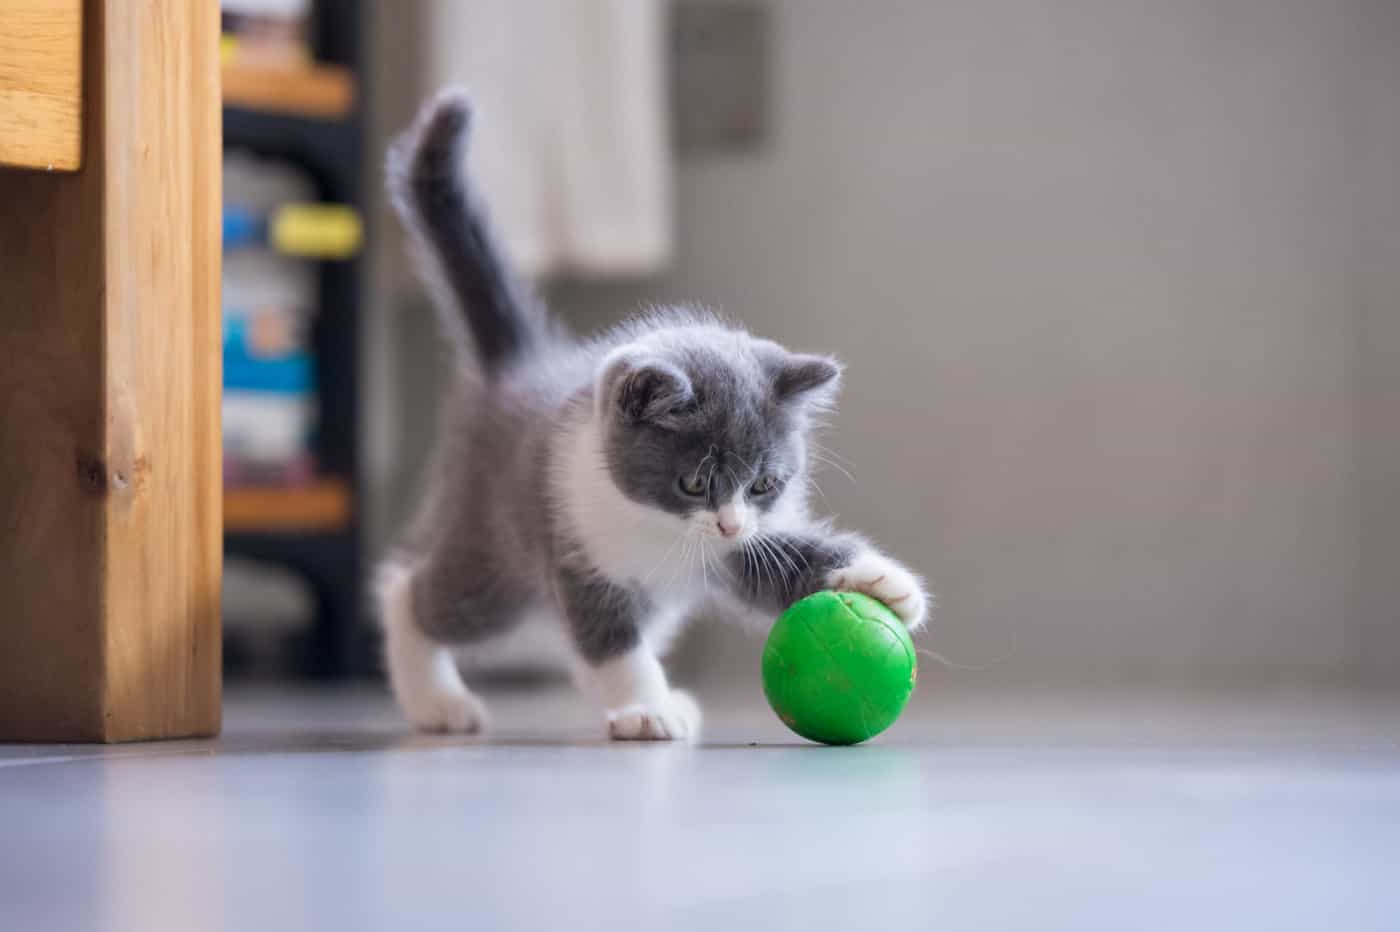 Kitten is playing with a ball